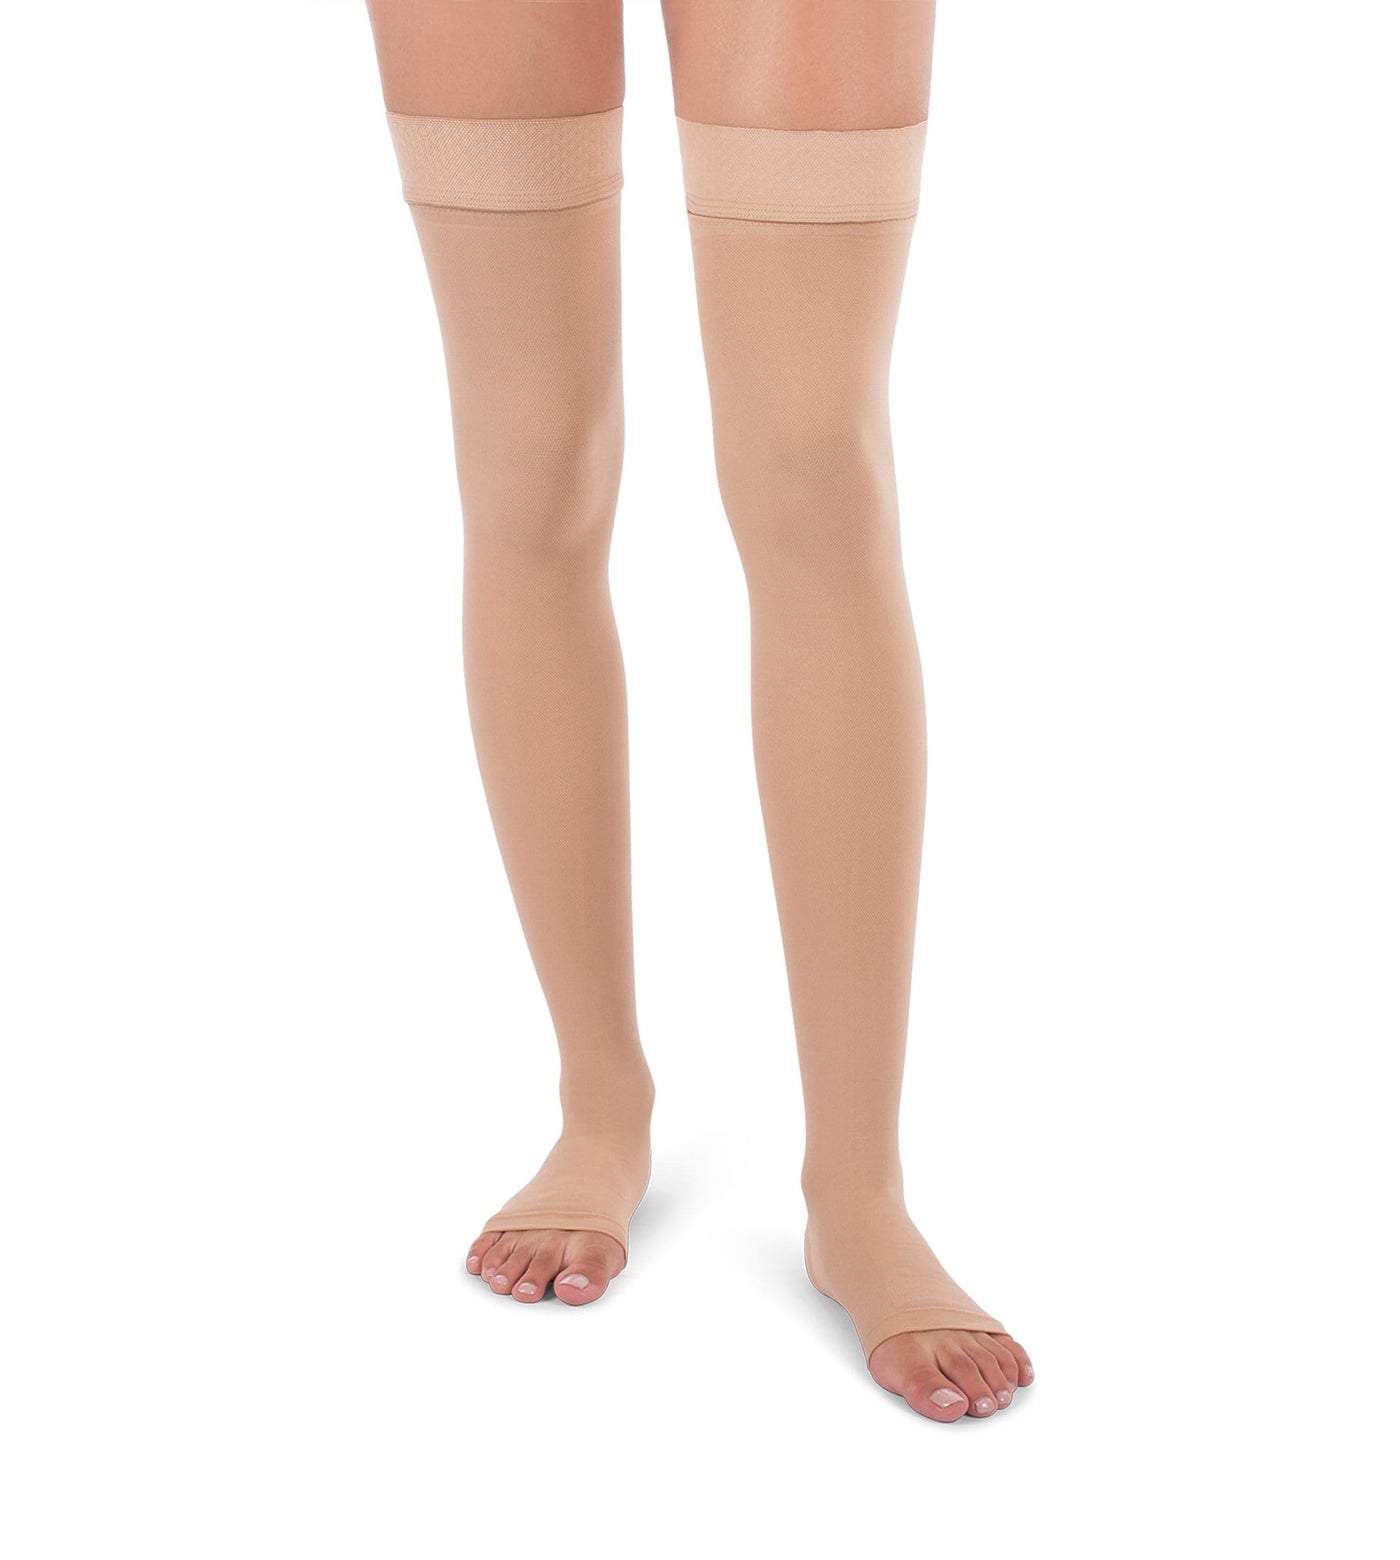 Thigh High Compression Stockings, 20-30mmHg Surgical Weight Open Toe 2